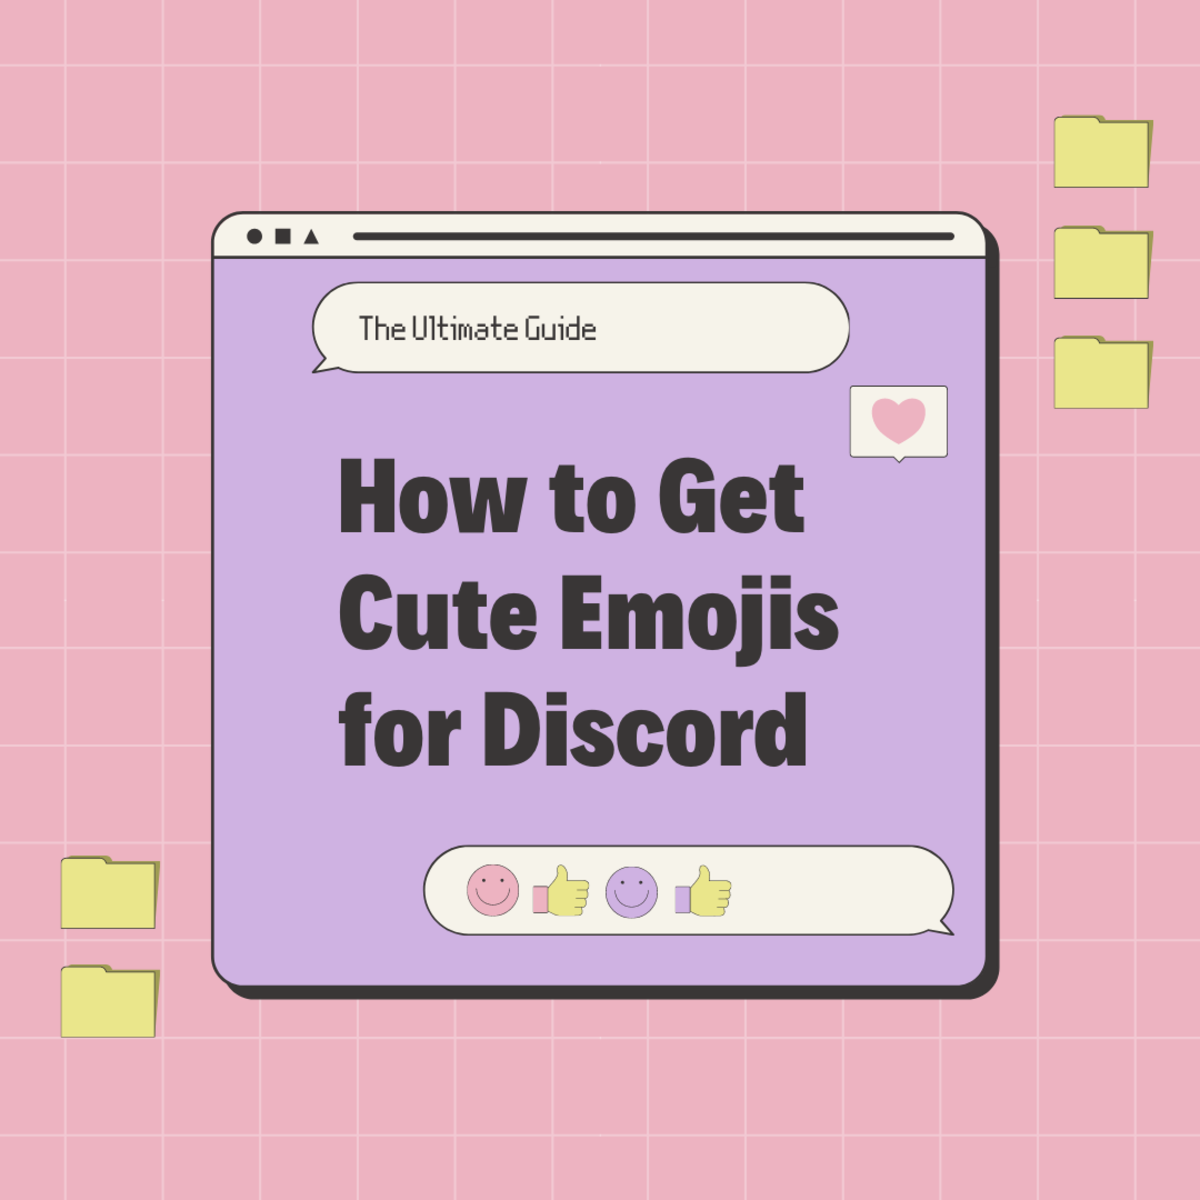 How to Get Cute Emoji for Discord: The Ultimate Guide - TurboFuture